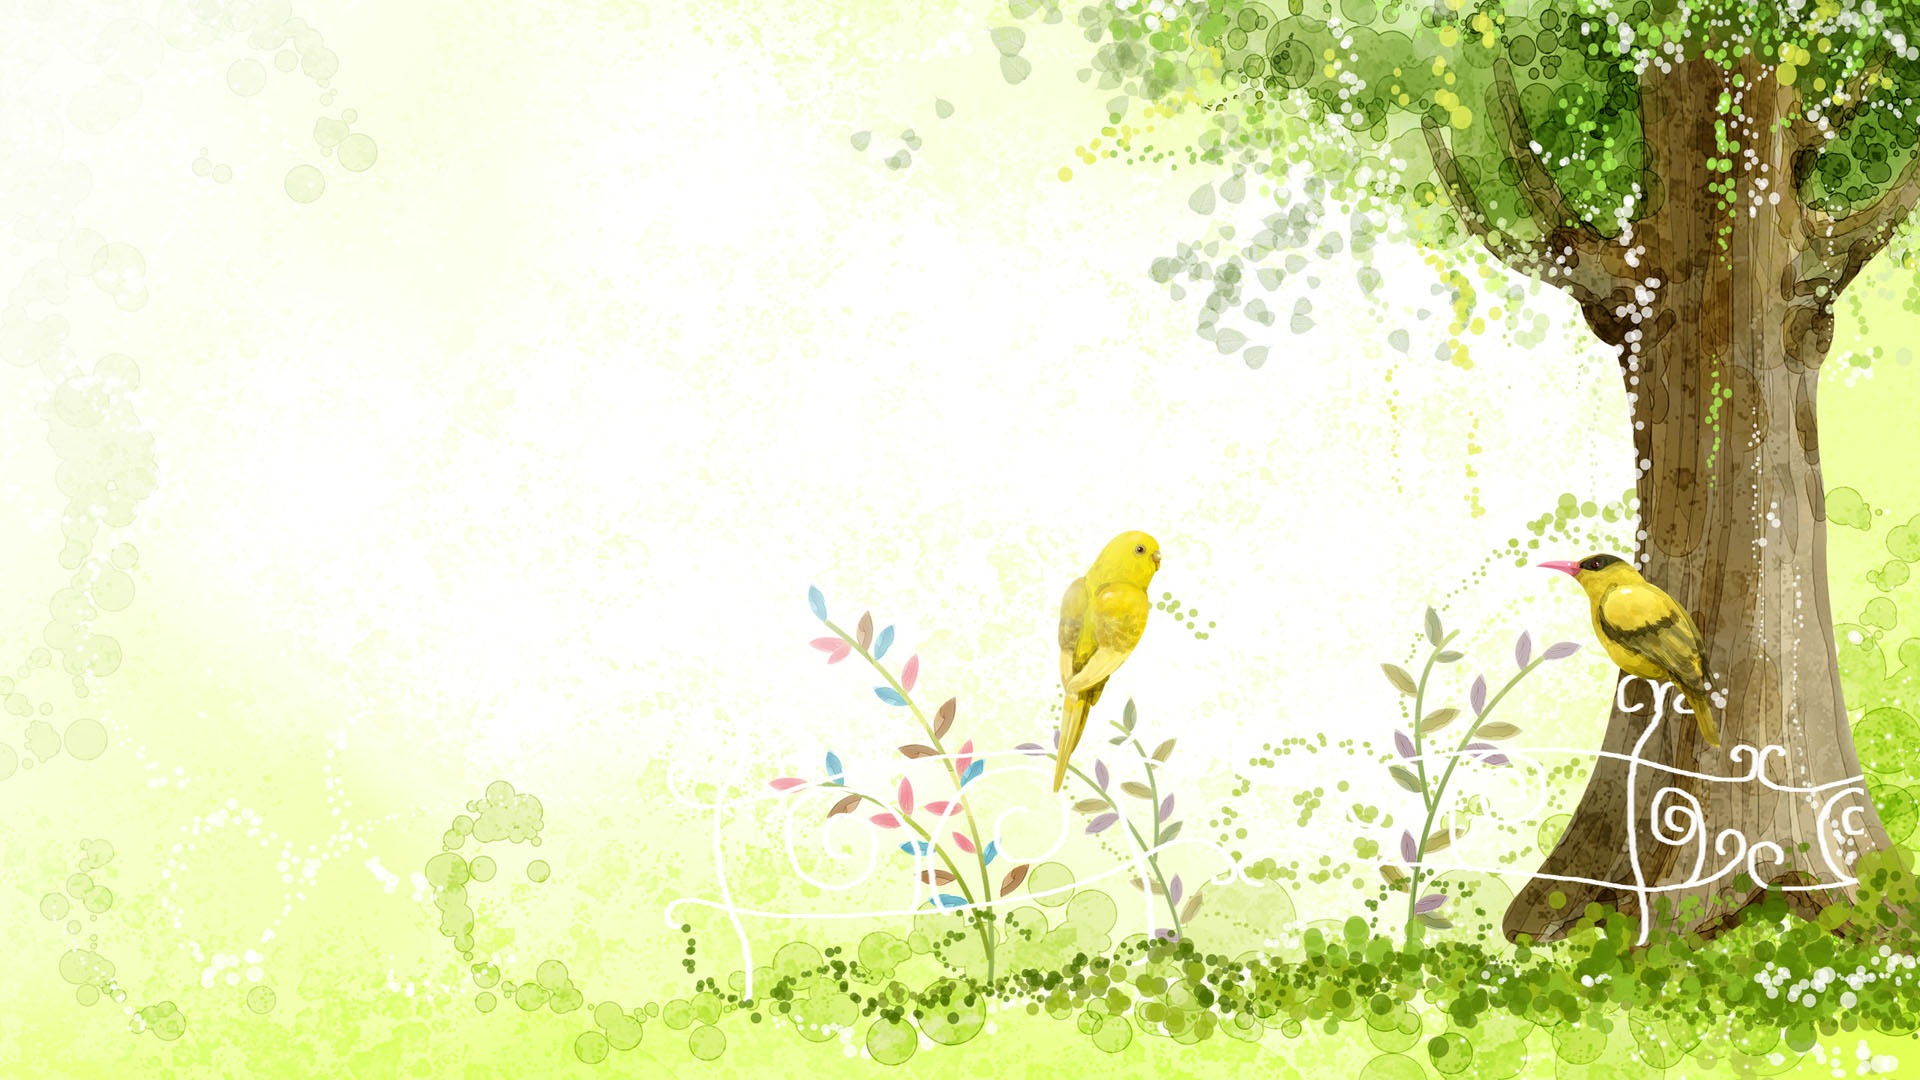 Hand-painted Fantasy Wallpapers (5) #7 - 1920x1080